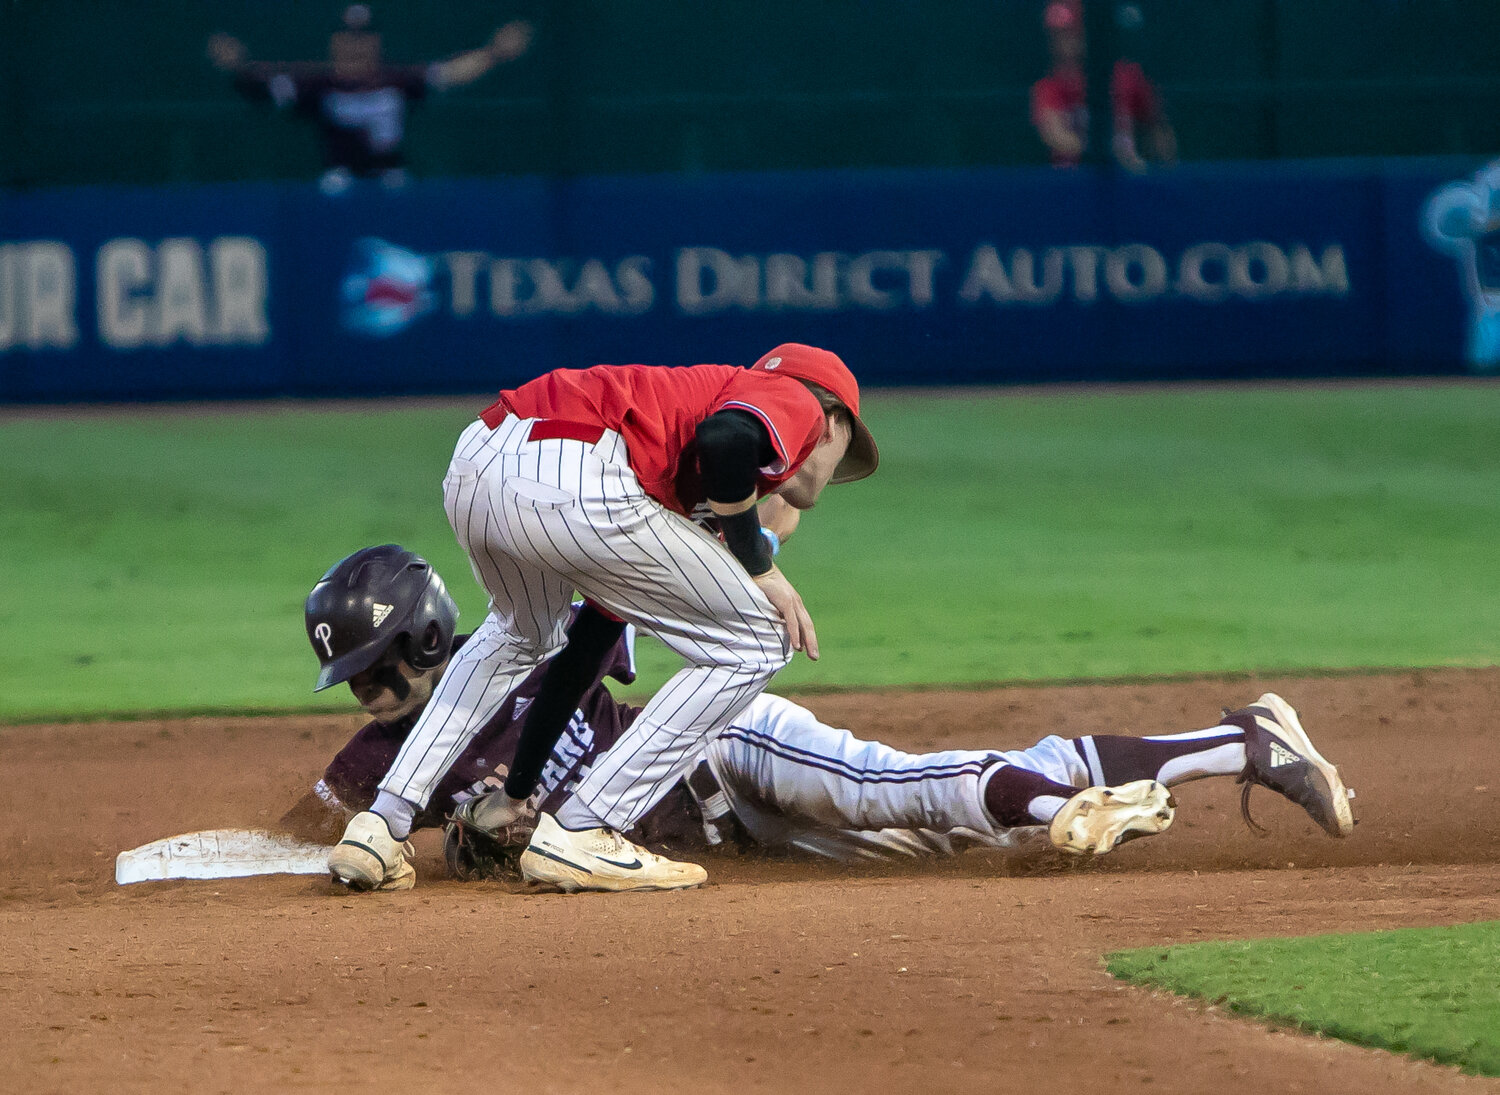 Graham Laxton tags out a runner during Friday's Regional Final between Katy and Pearland at Constellation Field in Sugar Land.